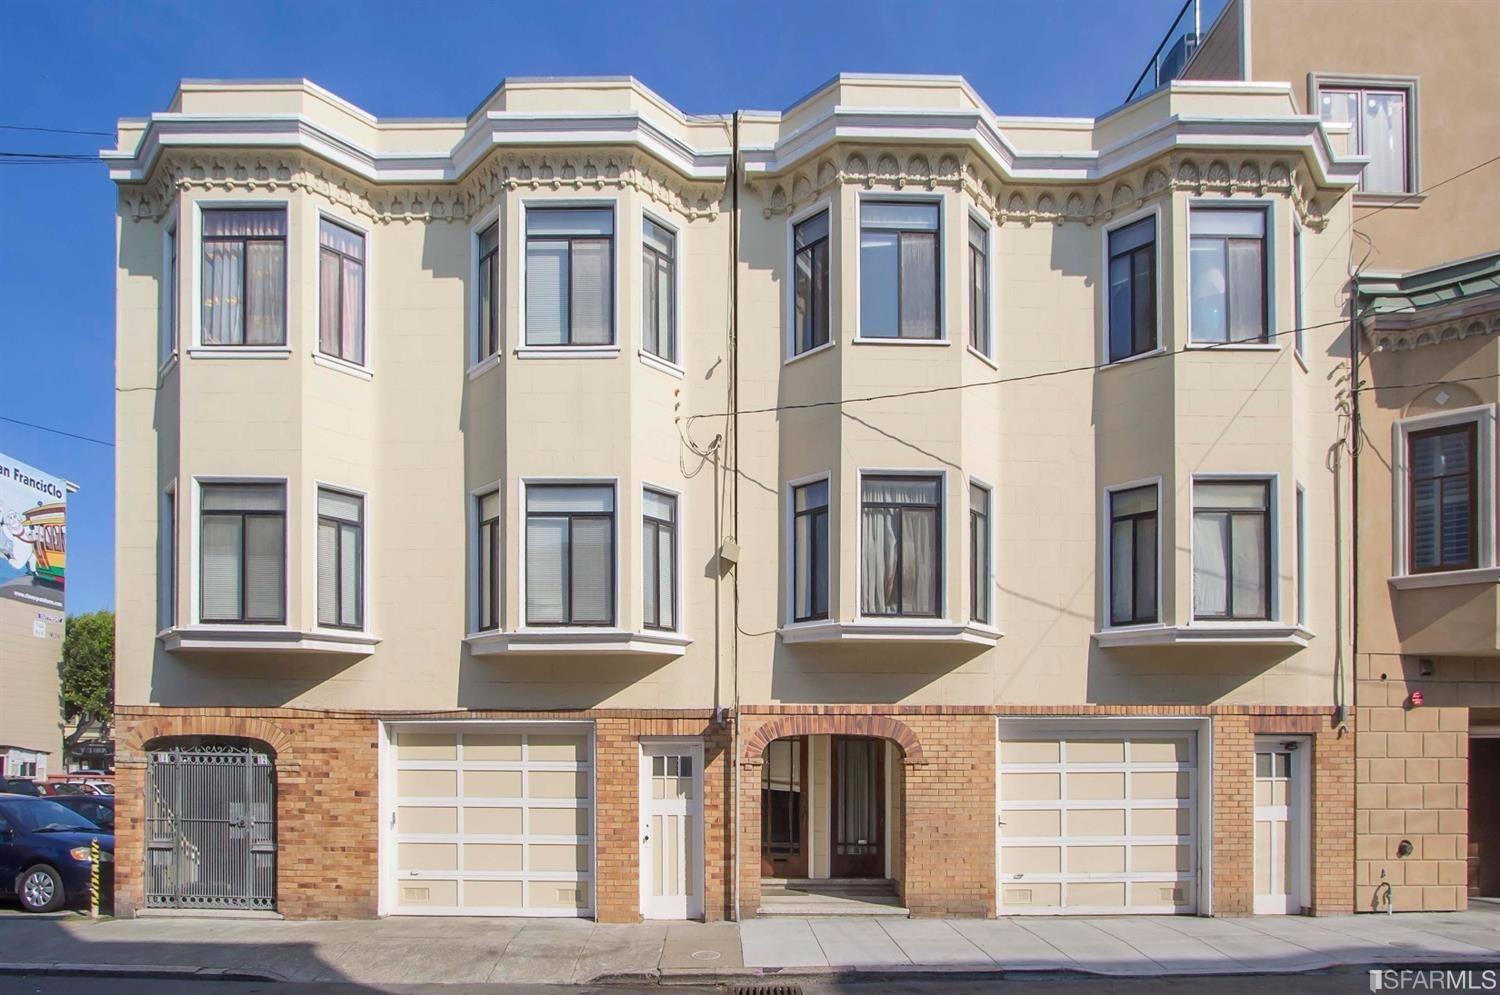 Marina / Cow Hollow Property Gets $1,200,000 More Than Asking